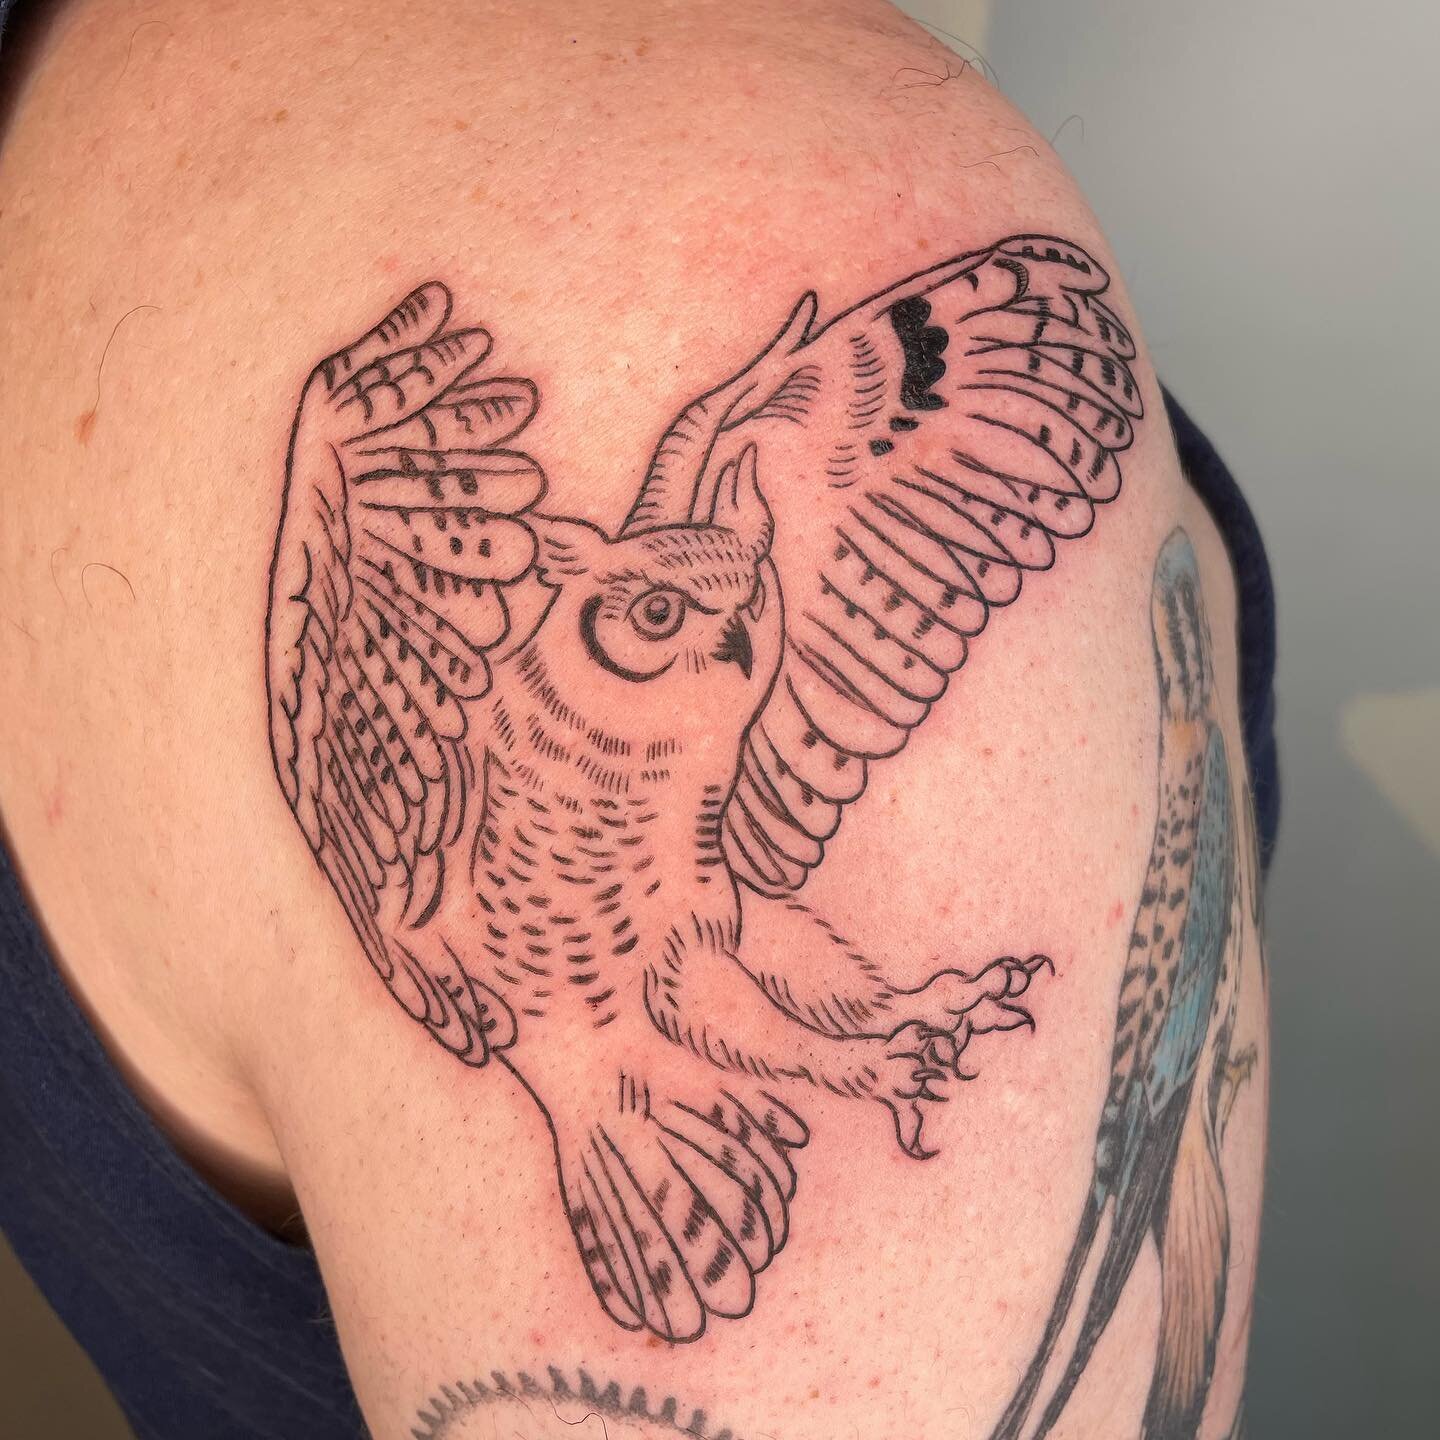 Hunting Great Horned Owl for Amit, who knows his birds. Thanks for the trust! #greathornedowl #owltattoo #birdtattoo #owl #queertattooartist #pdxtattoo #pdxtattooartist